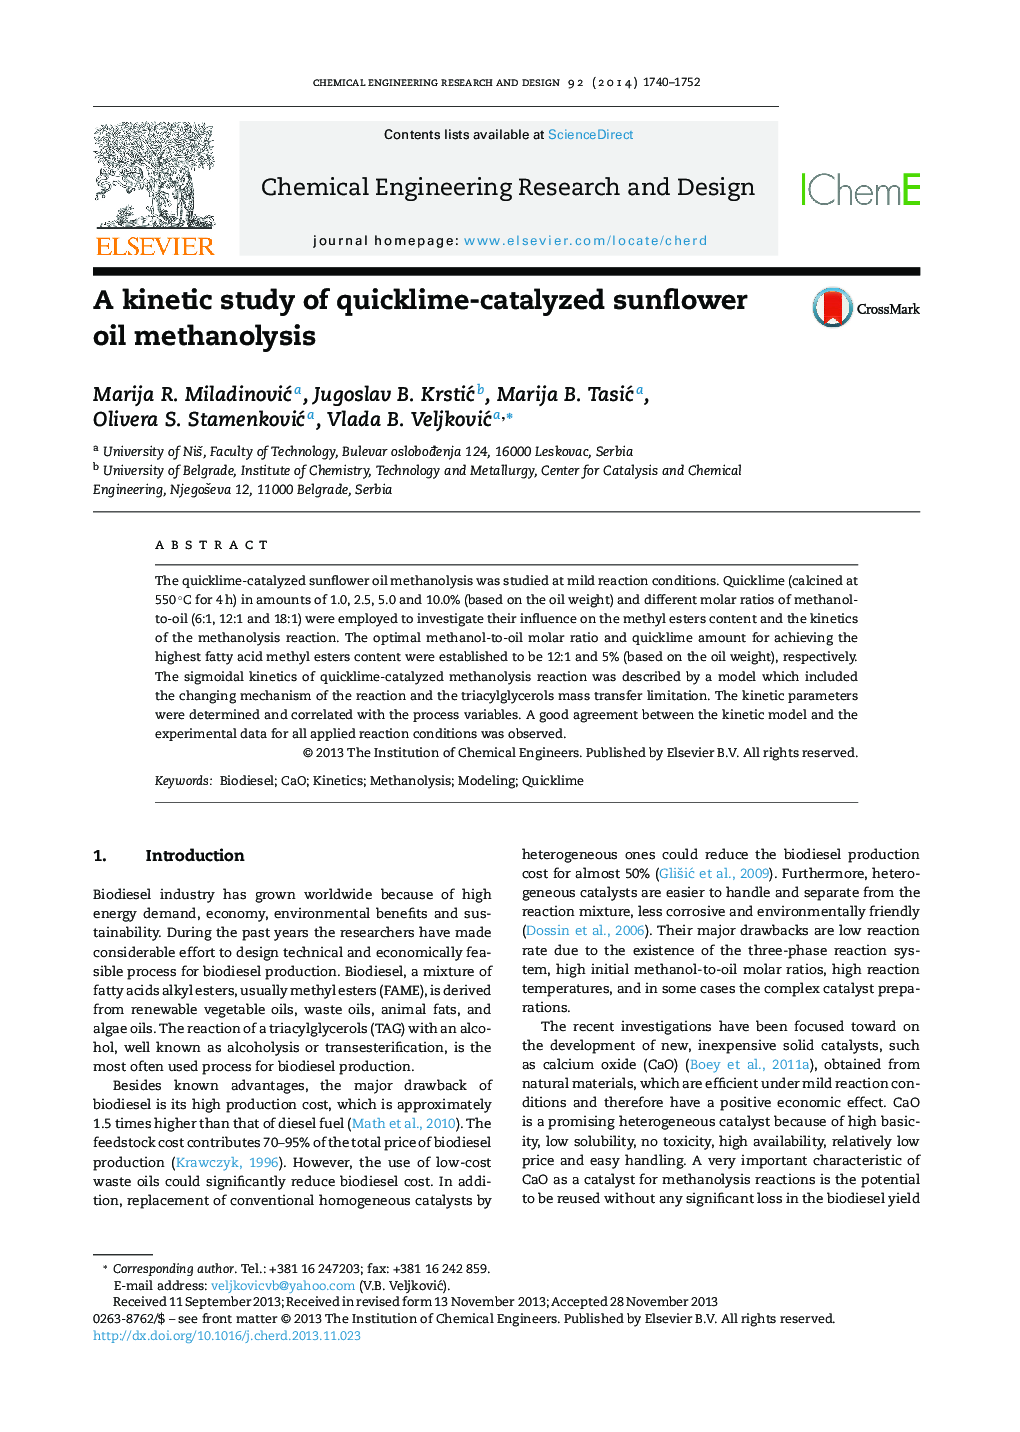 A kinetic study of quicklime-catalyzed sunflower oil methanolysis